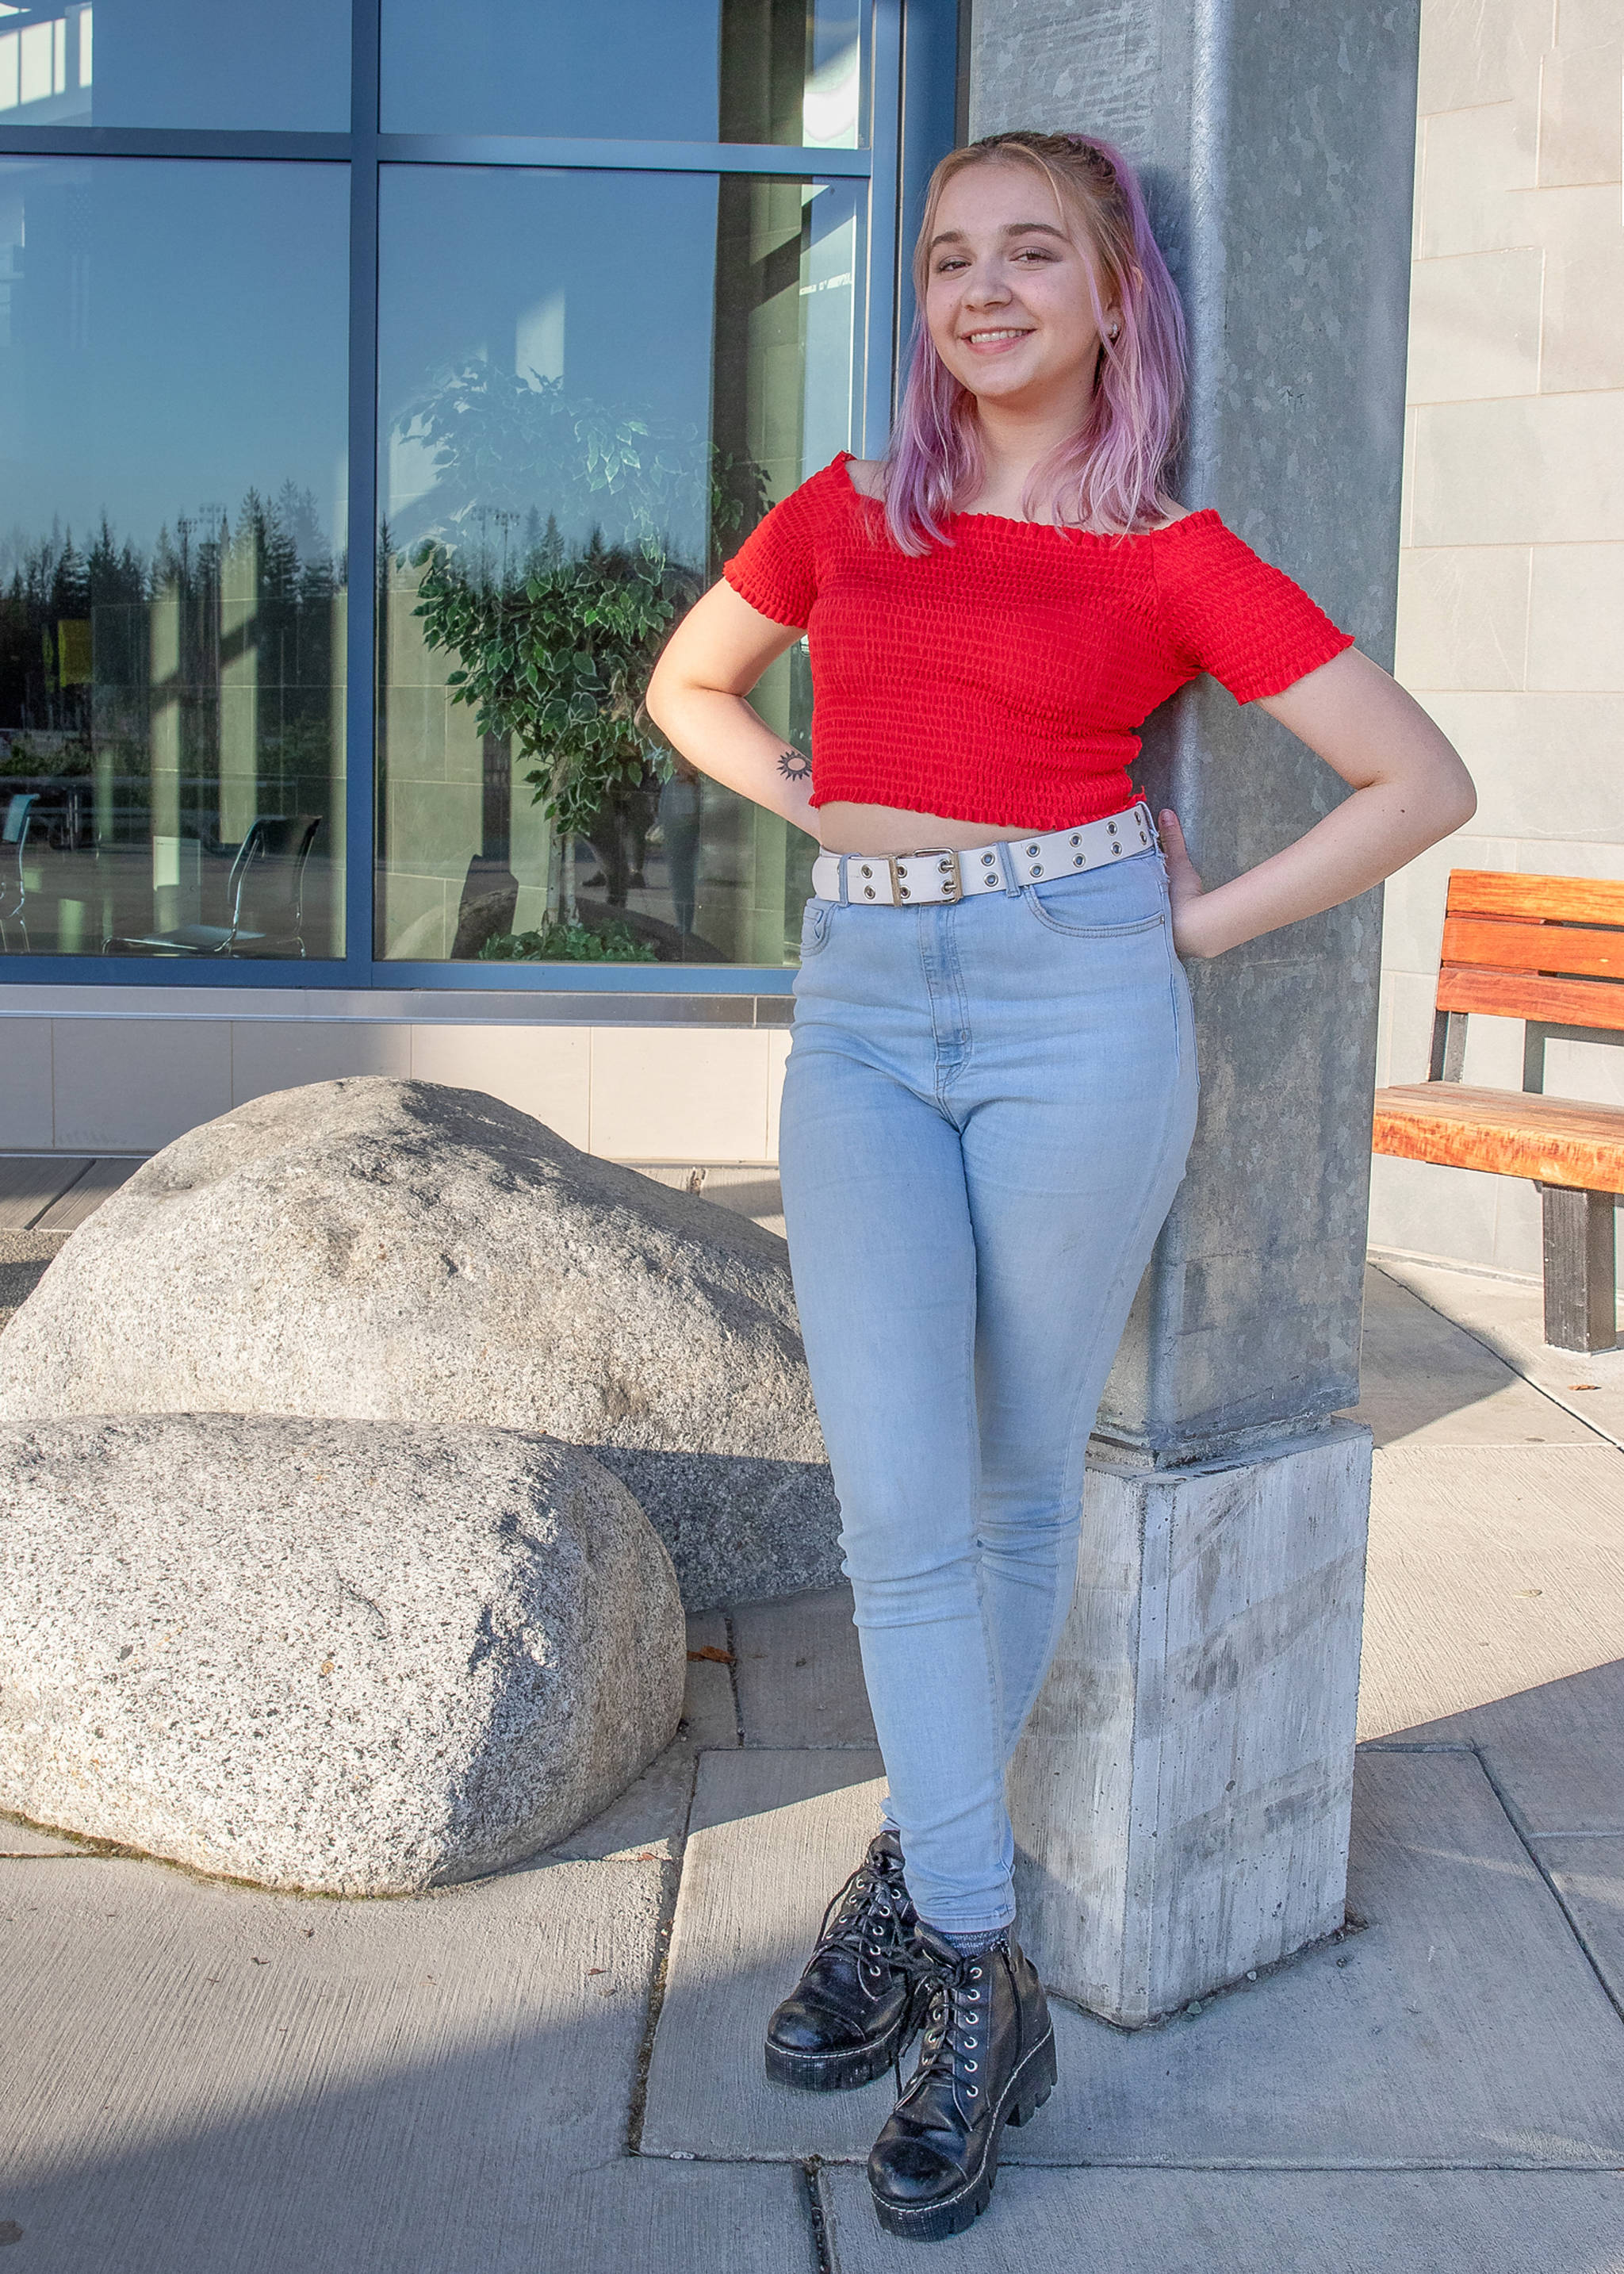 April 28, 2019: Caro Schultheis, a Juneau-Gastineau Rotary Club exchange student, hails from Buenos Aires, Argentina. She brings a trendy and fashionable style to Juneau with her. This day she wore a red off-the-shoulder crop top from Ona Saez, high-rise skinny jeans from Forever 21, a white faux leather belt and bold, black leather lace-up boots. Her finishing touch — streaks in her hair courtesy of Arctic Fox, purple rain.